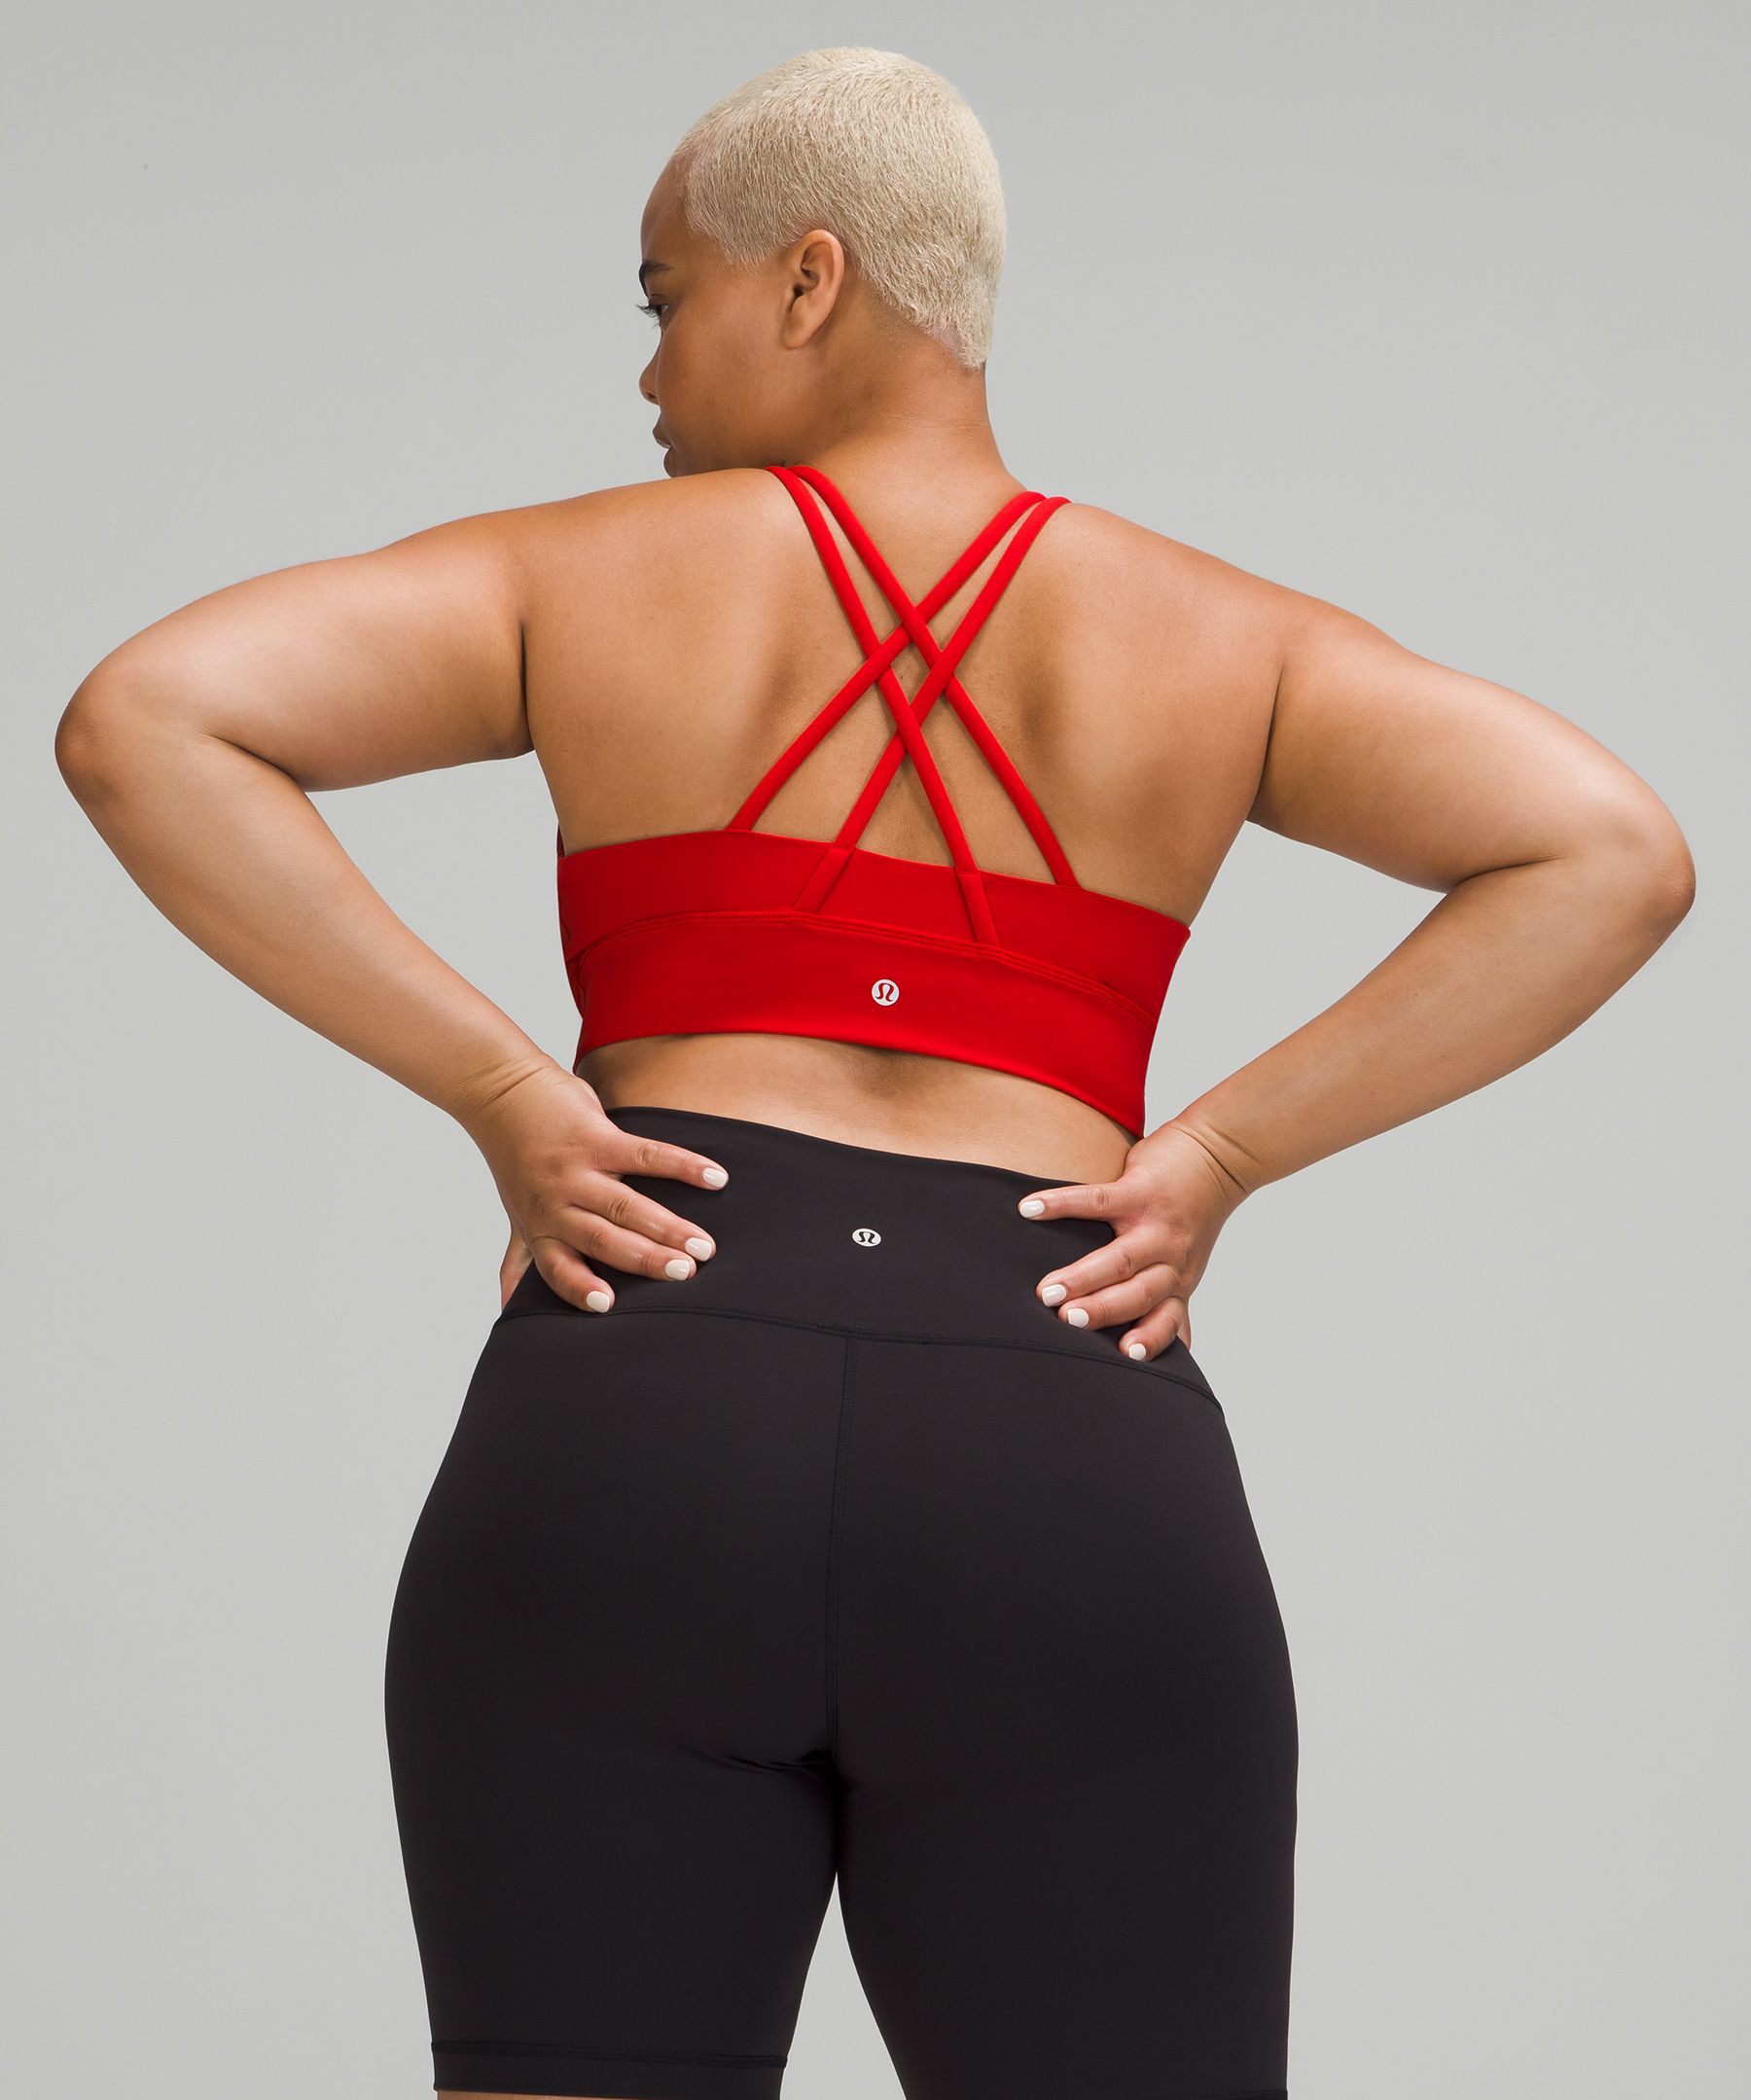 Lululemon deep red sports bra Size undefined - $13 - From Lindsey